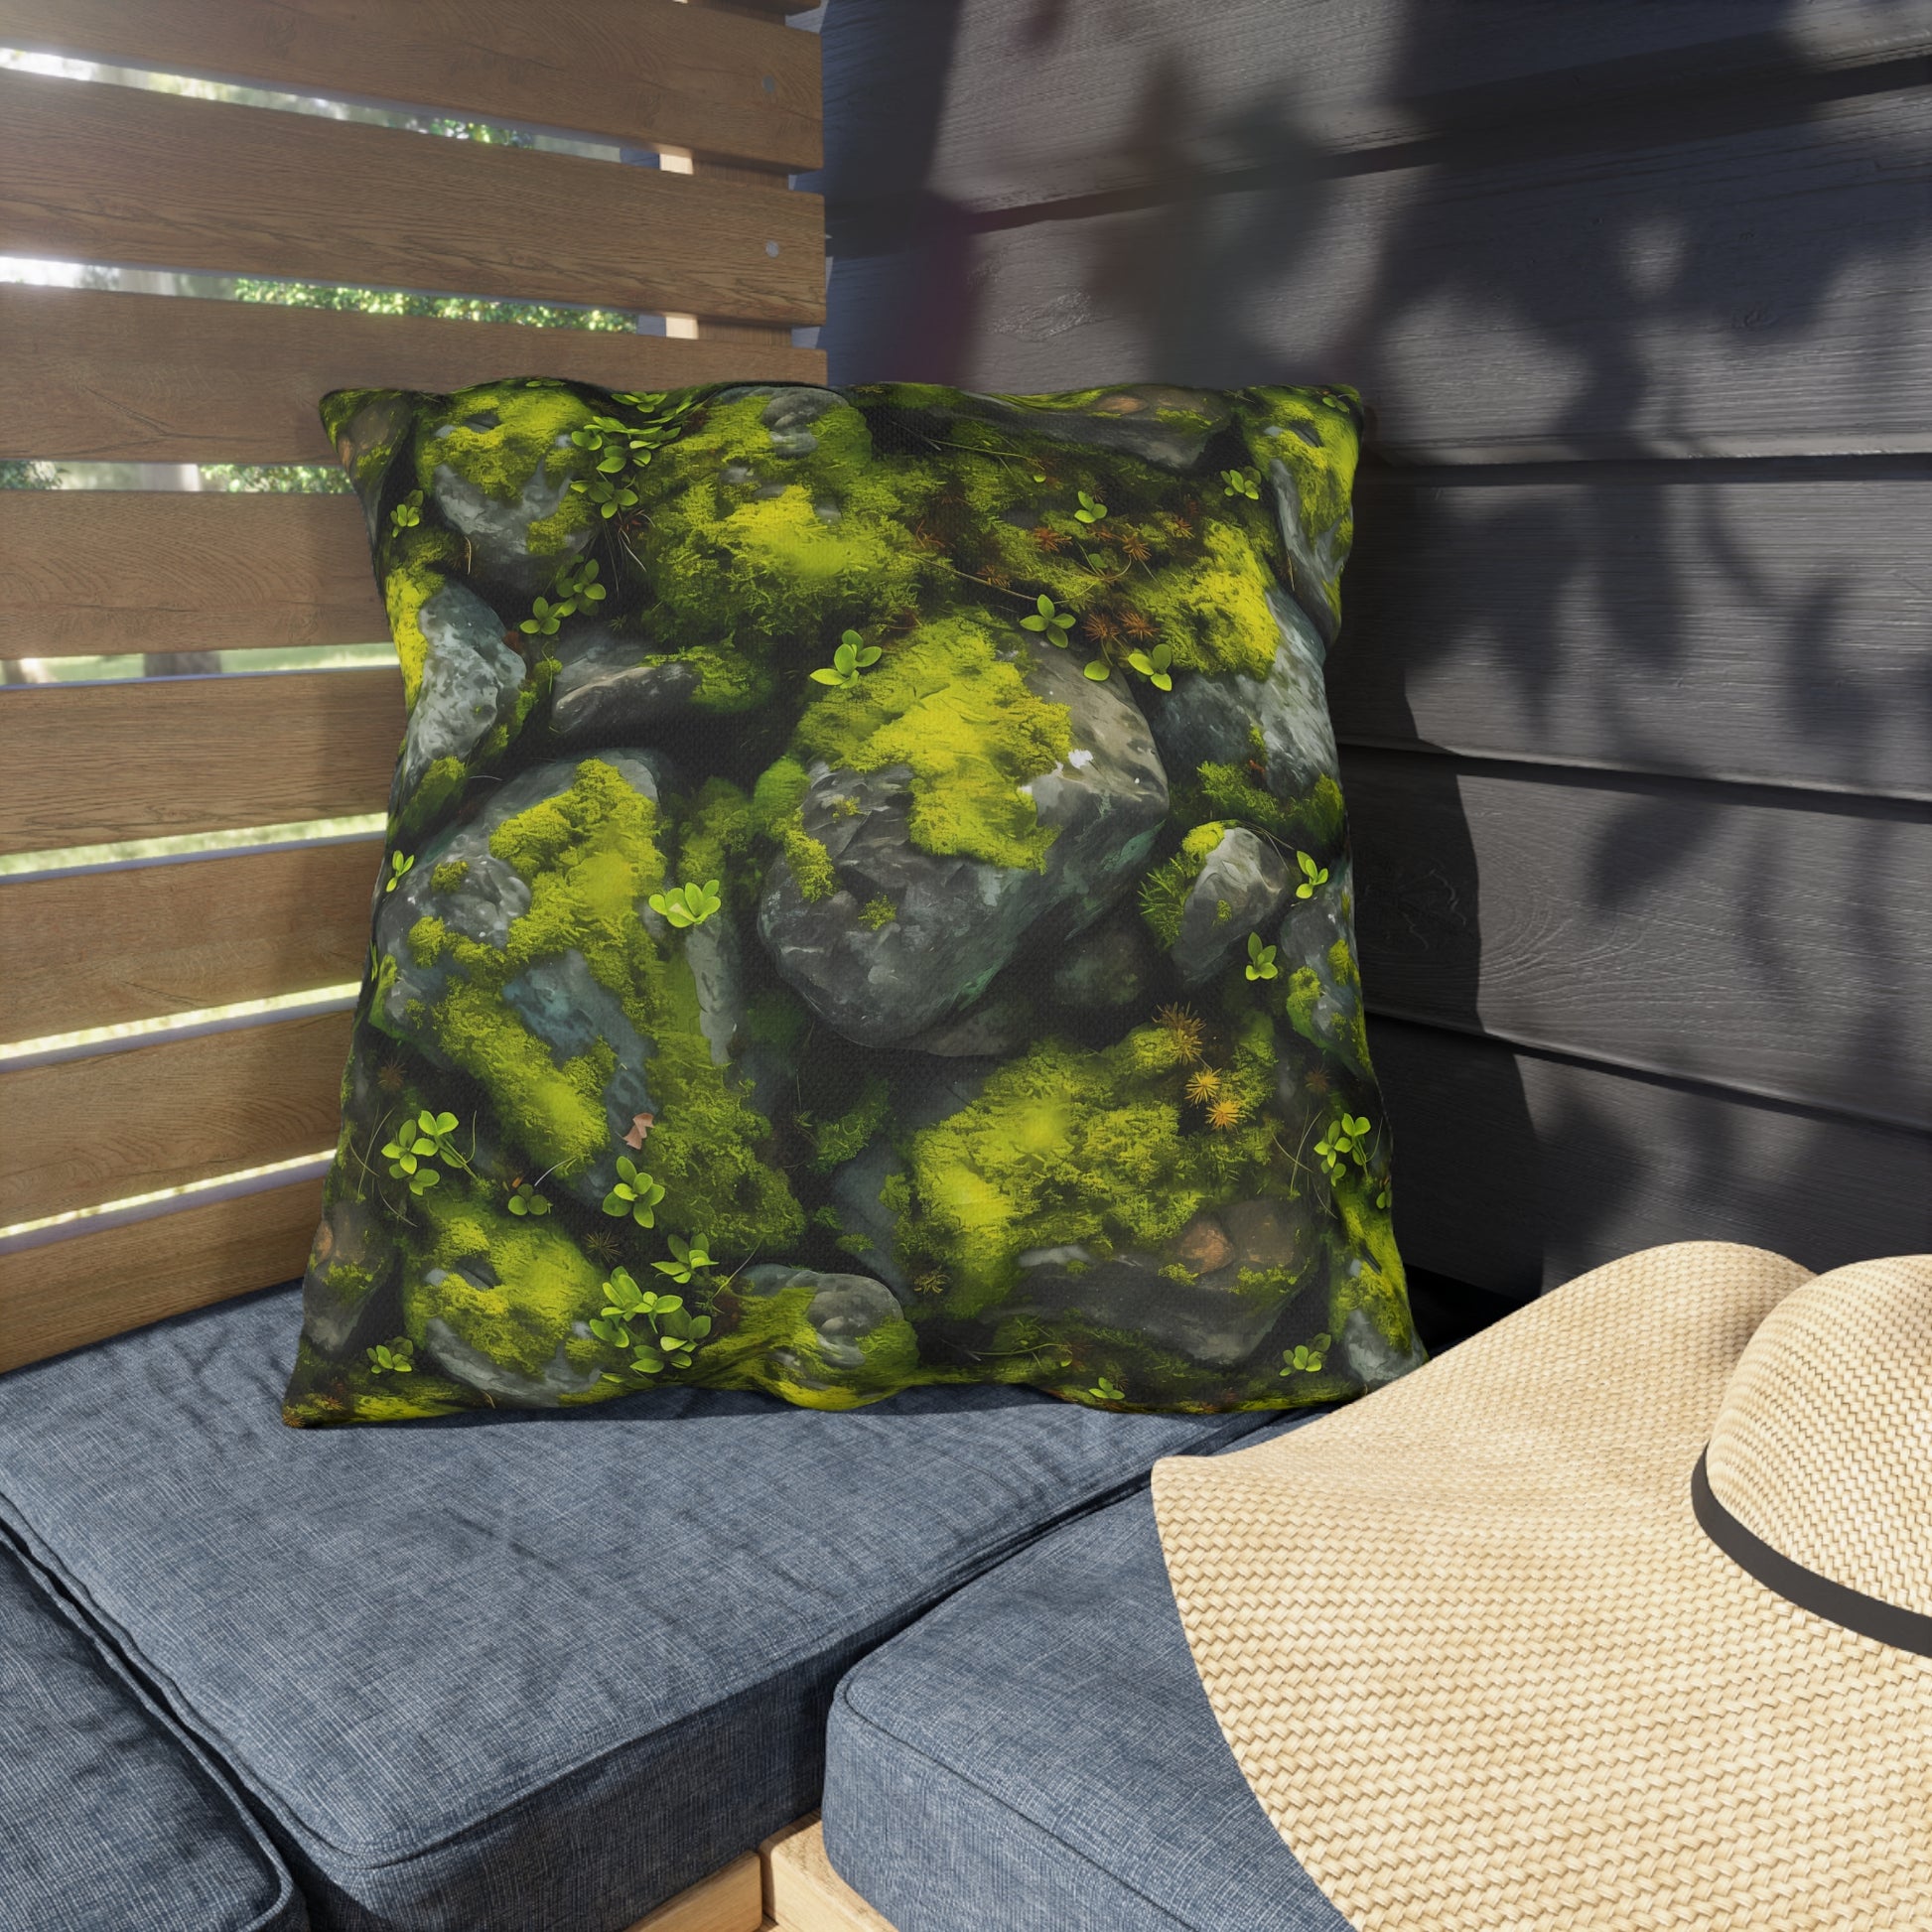 Outdoor Pillow | Moss Covered Rocks Throw Pillow from The Curated Goose